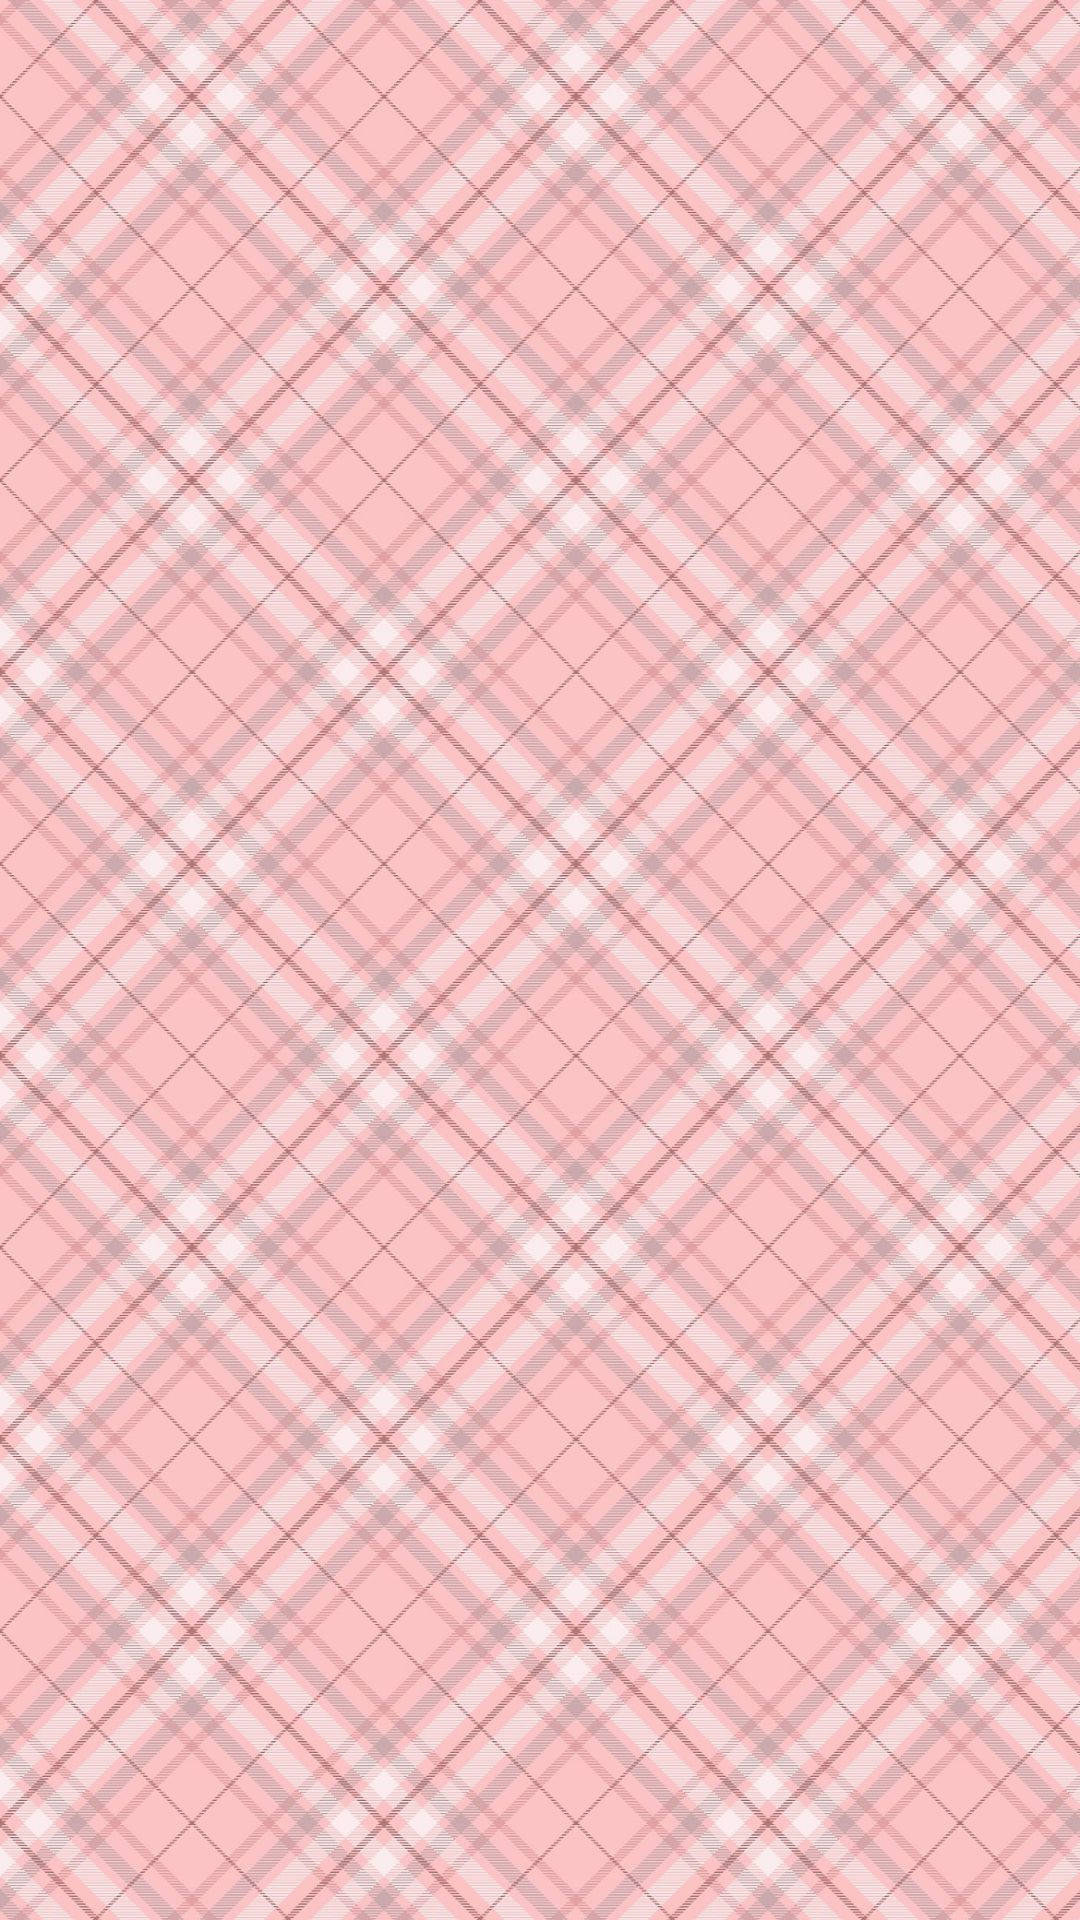 Aesthetic Pink Checkered